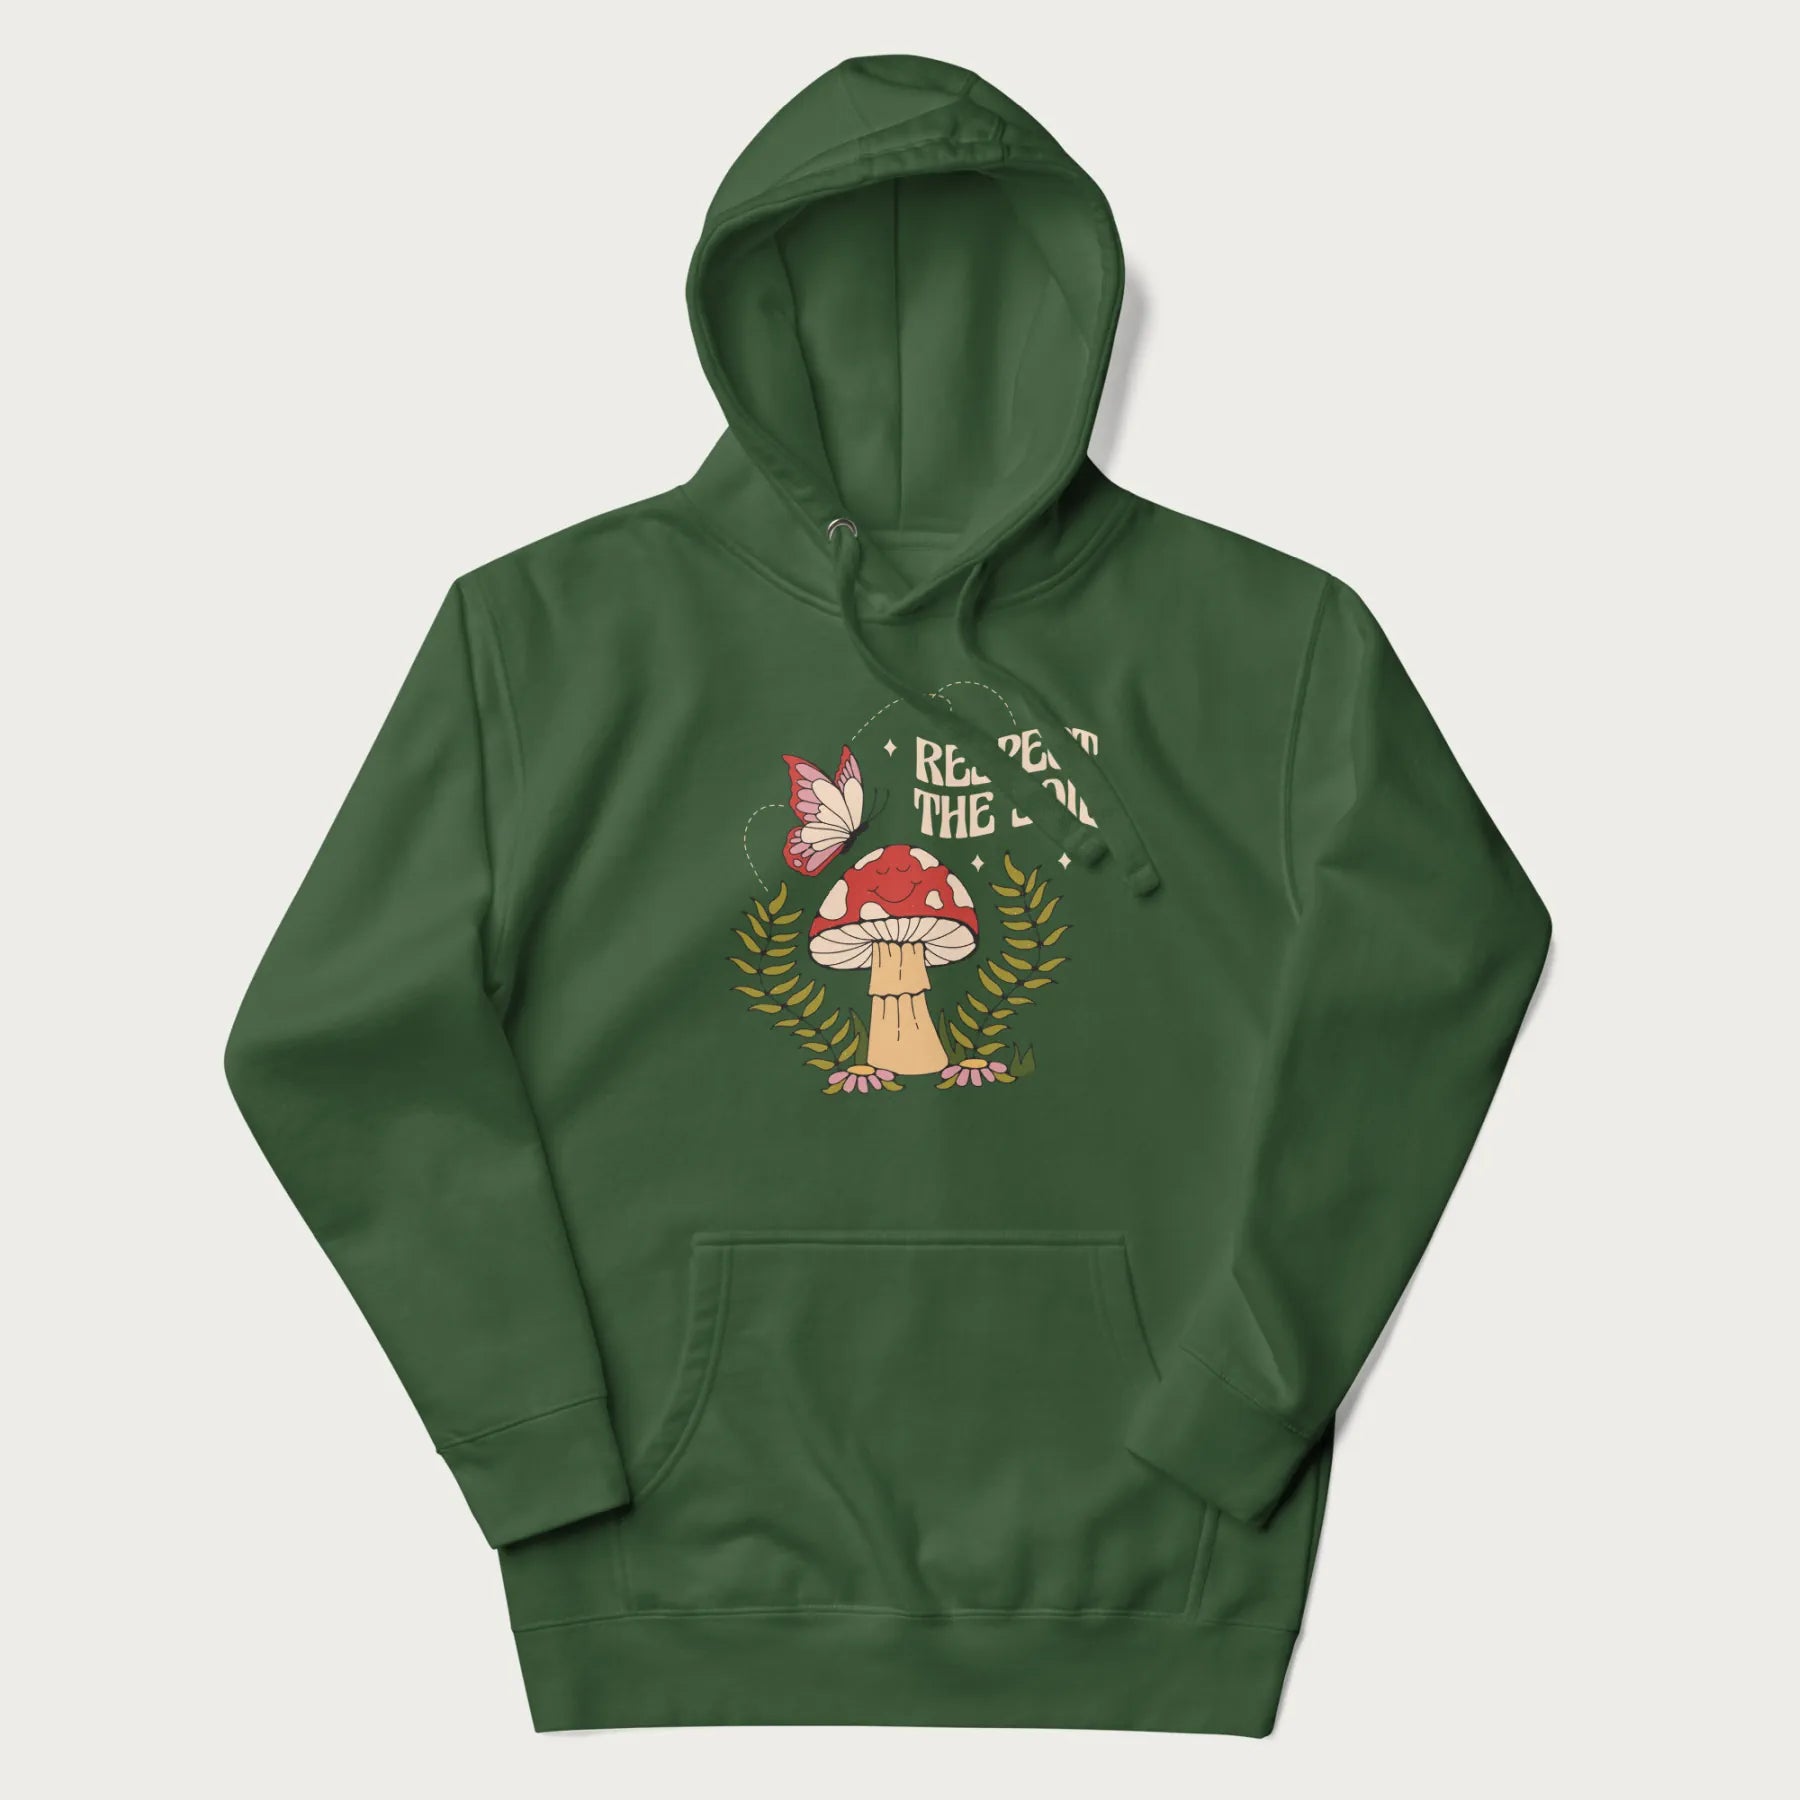 Forest green hoodie with mushroom and butterfly design, with the text 'Respect the Soil' above it. 